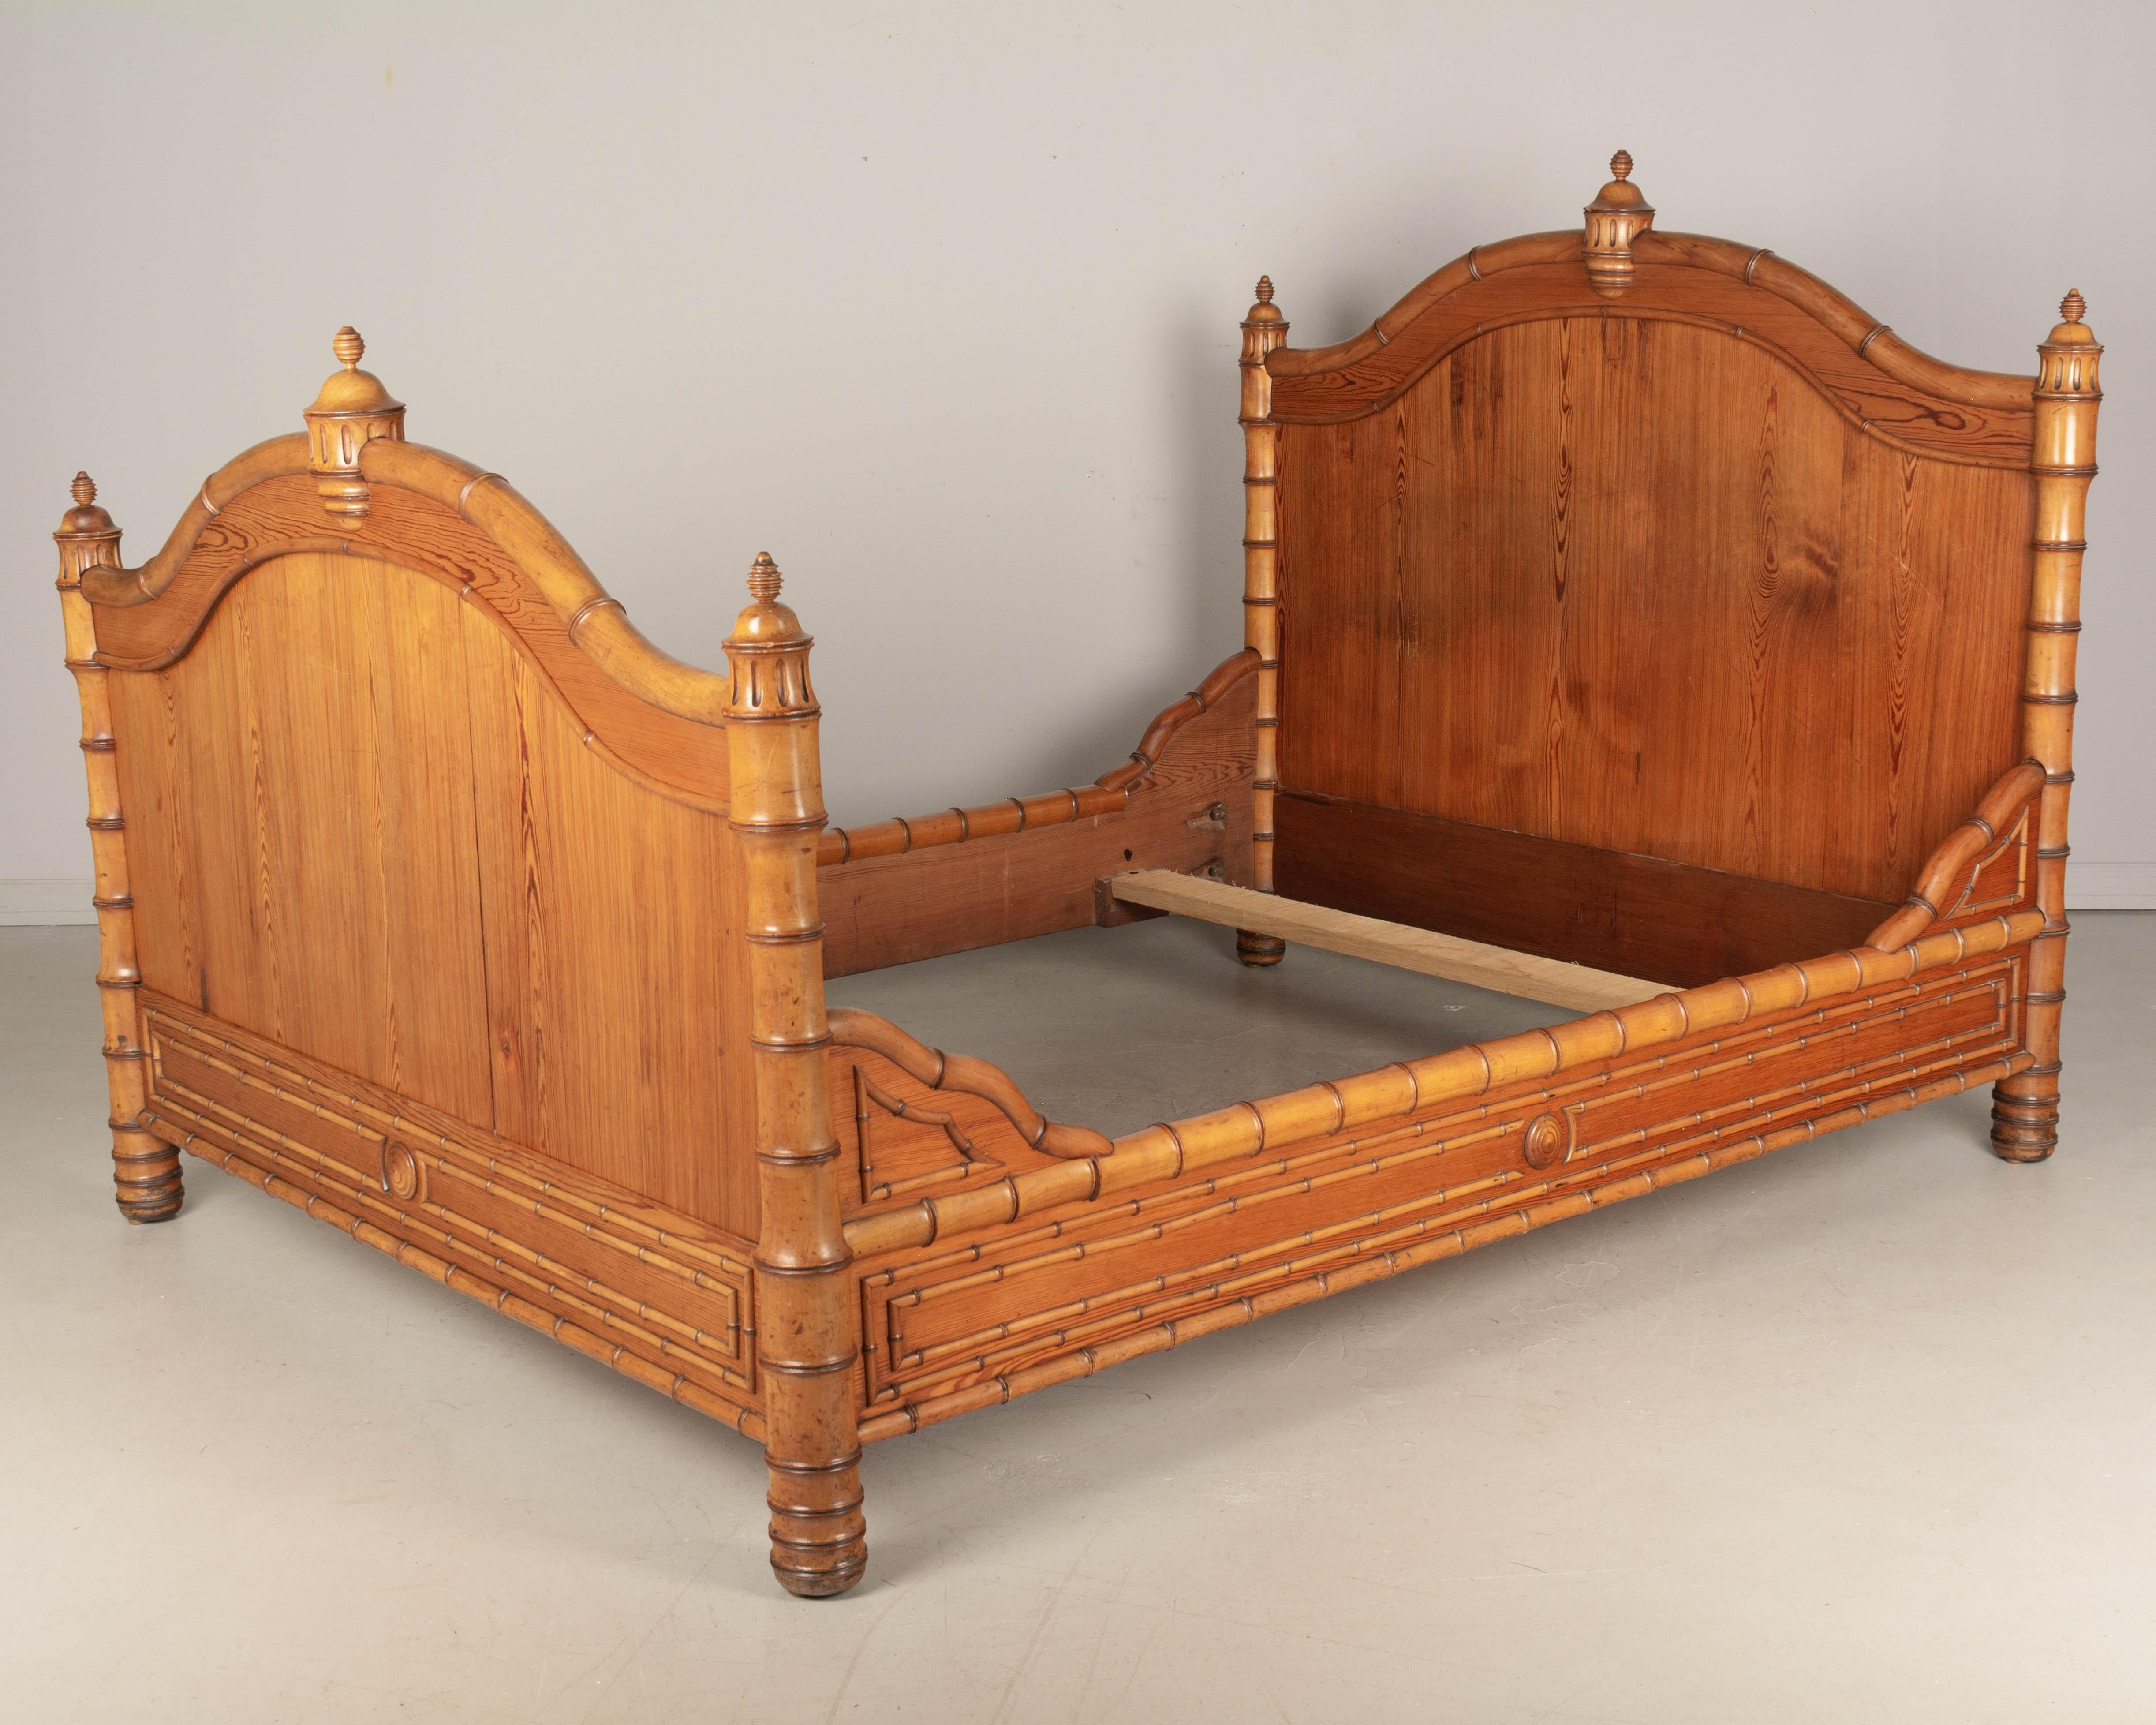 A good quality 19th century French faux bamboo bed, handcrafted of pitch pine with carved cherry wood decorative trim. Large turned bedposts and center decorations. Nice faux bamboo pattern trim. Two small pieces of trim missing on the side rails.